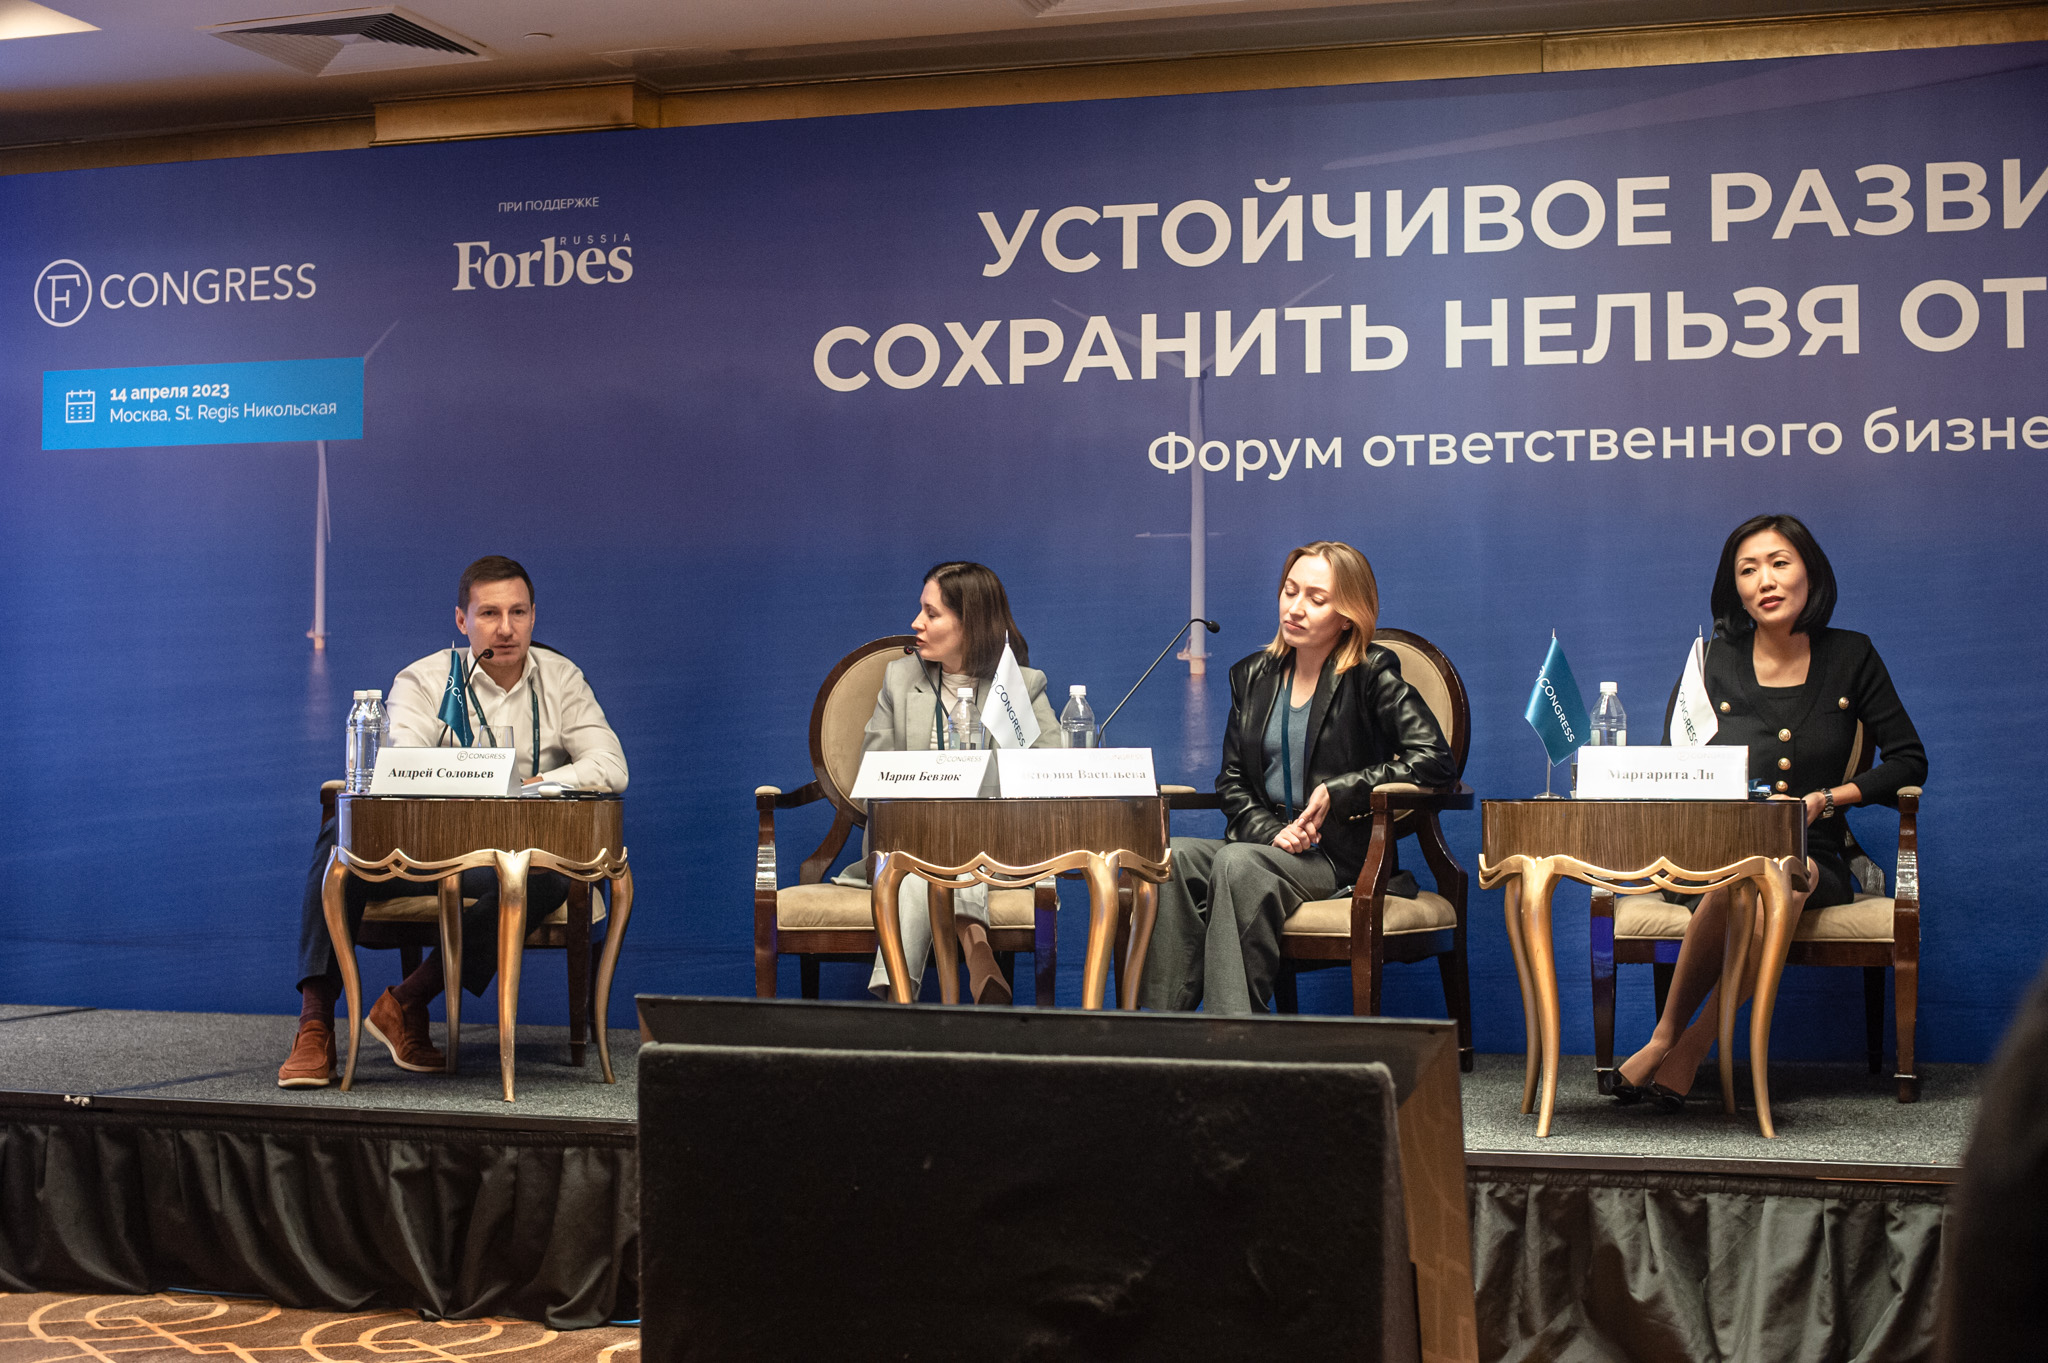 forbes congress russia